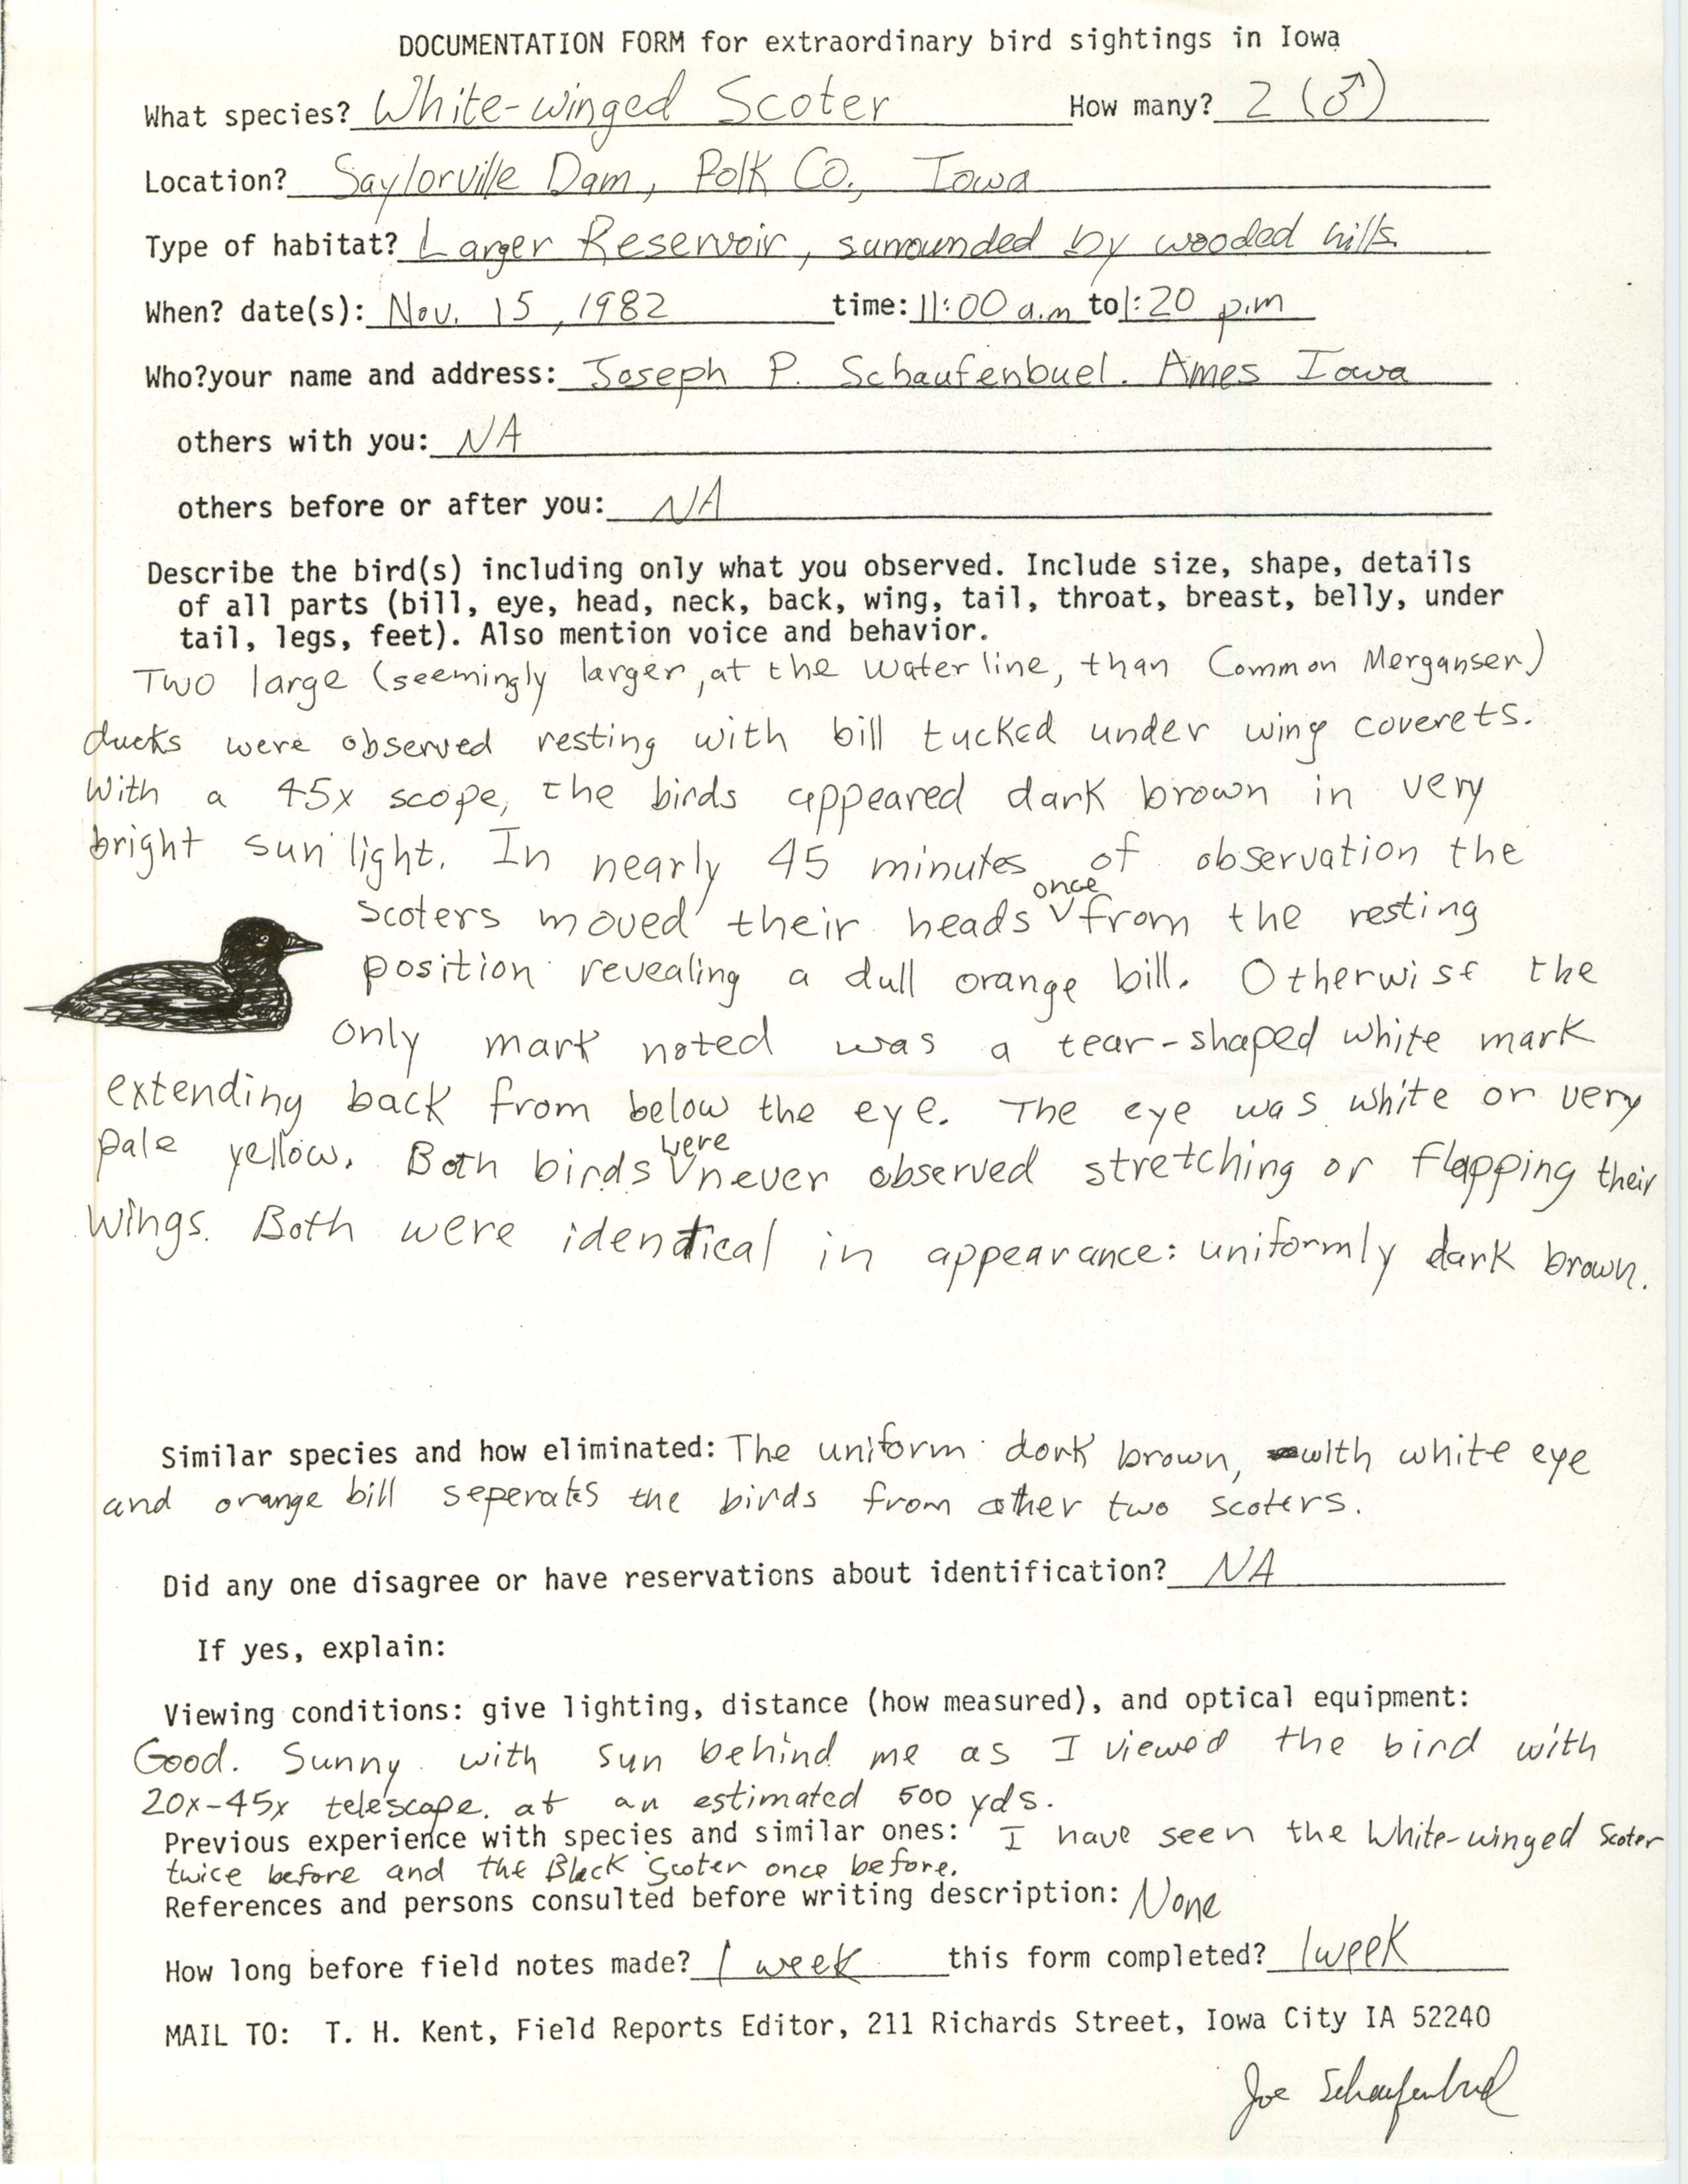 Rare bird documentation form for White-winged Scoter at Saylorville Dam, 1982